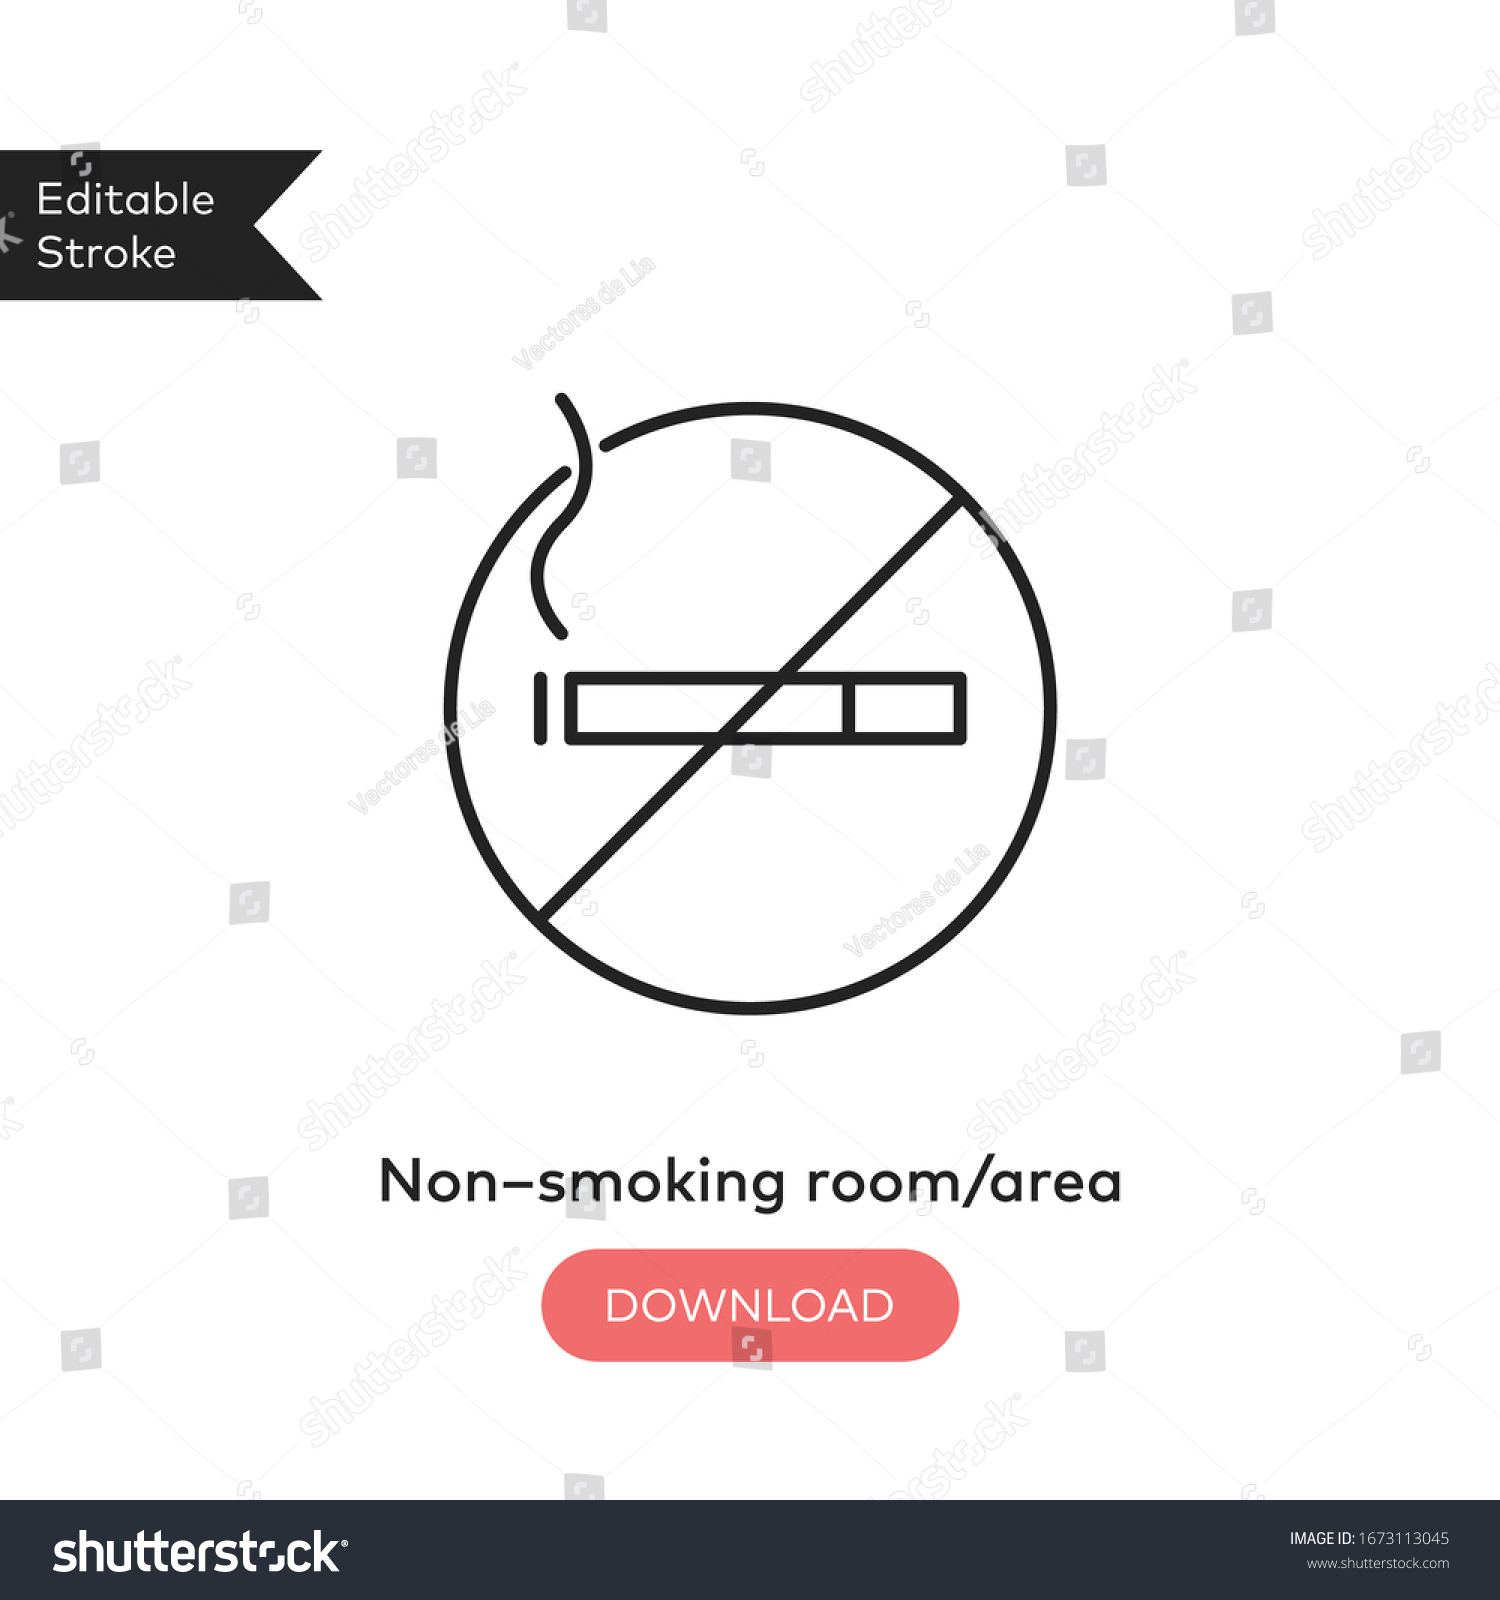 Luxury Hotel Vector Icon Set with Editable Stroke. EPS 10. No Smoking, No Cigarette with Smoke and Prohibited Sign #1673113045